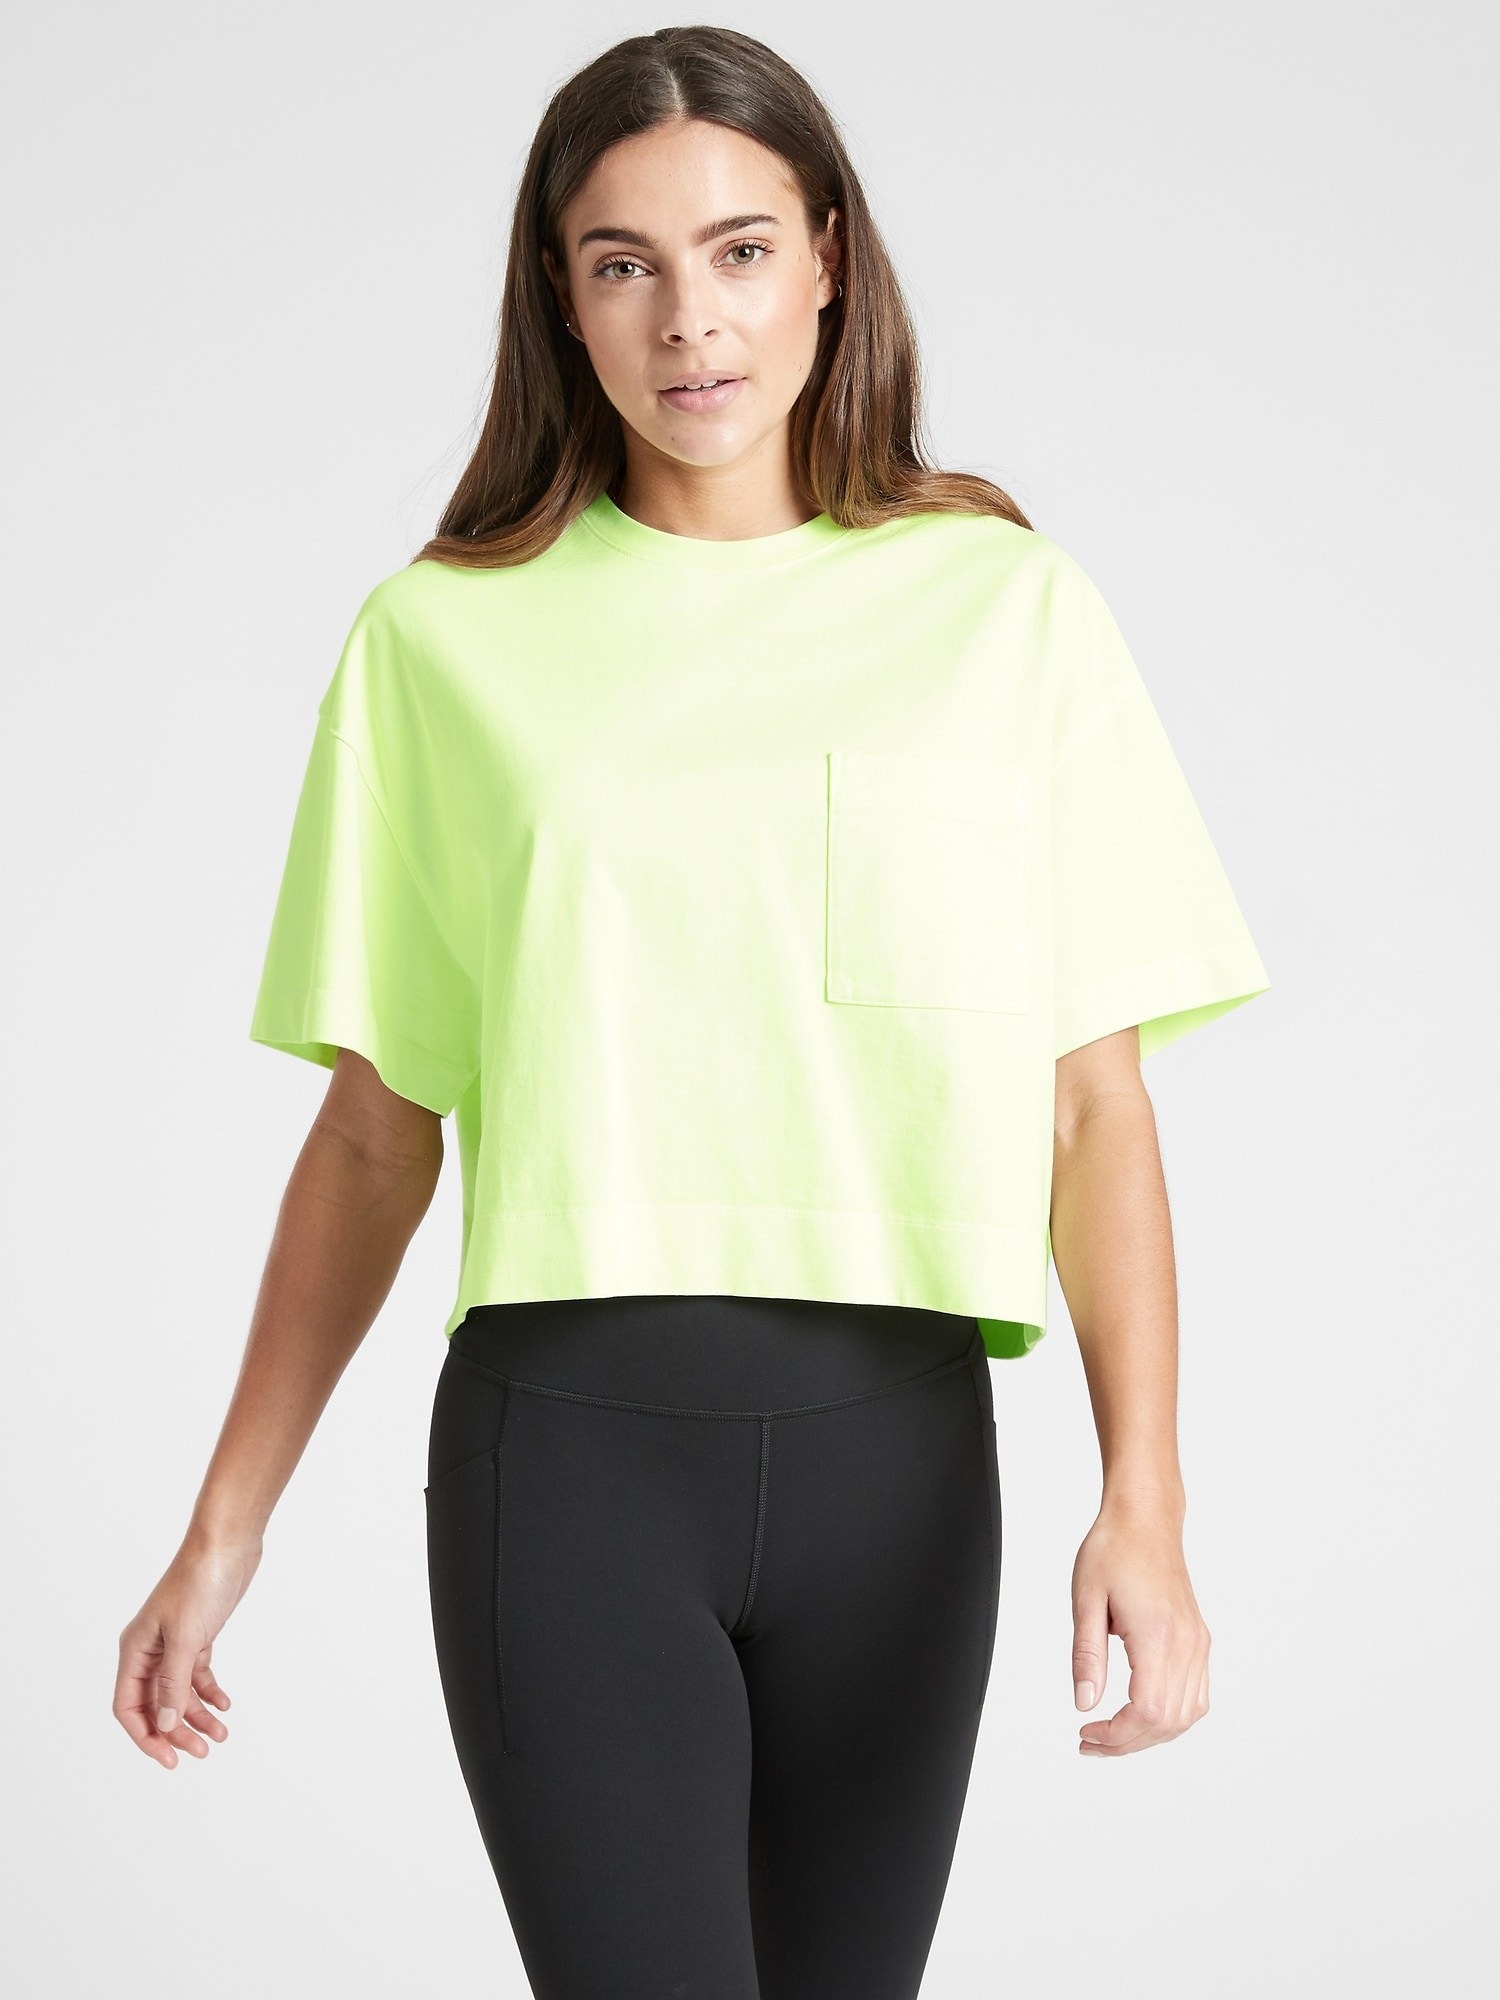 Model wearing cropped lime tee with pocket on left chest